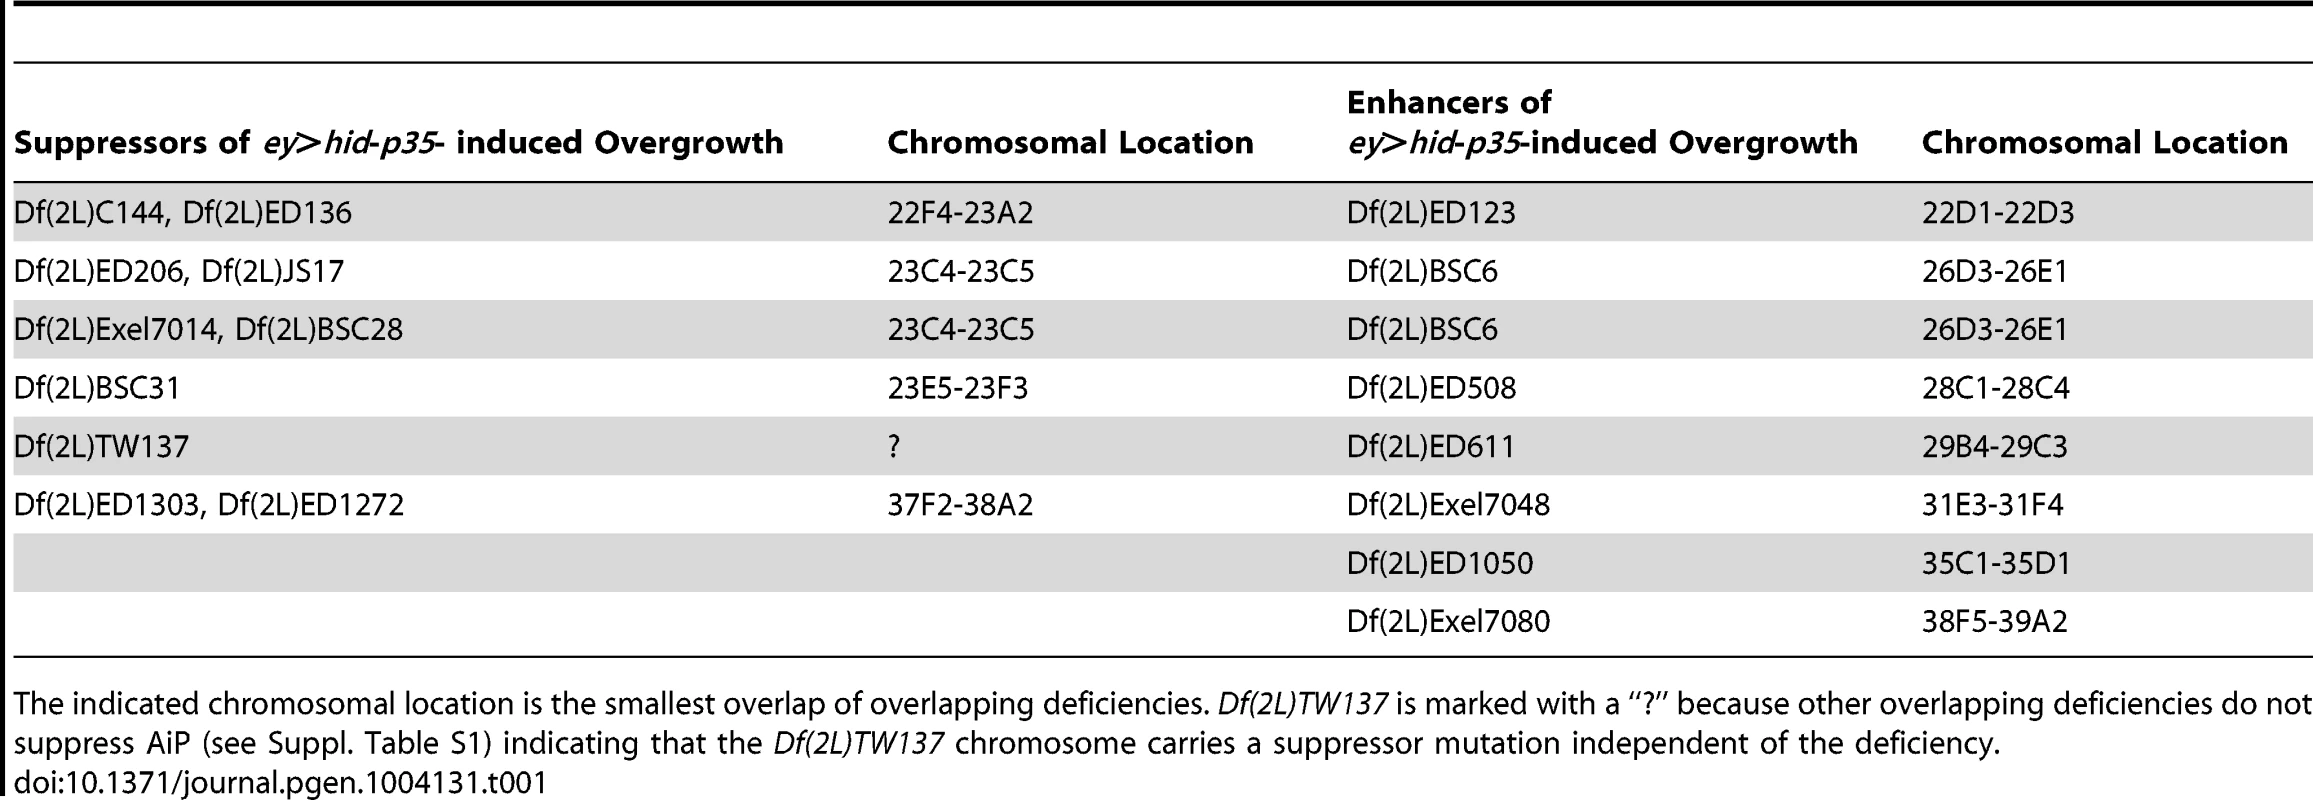 Deficiencies that modify the <i>ey&gt;hid-p35</i>-induced AiP phenotype as suppressors or enhancers.